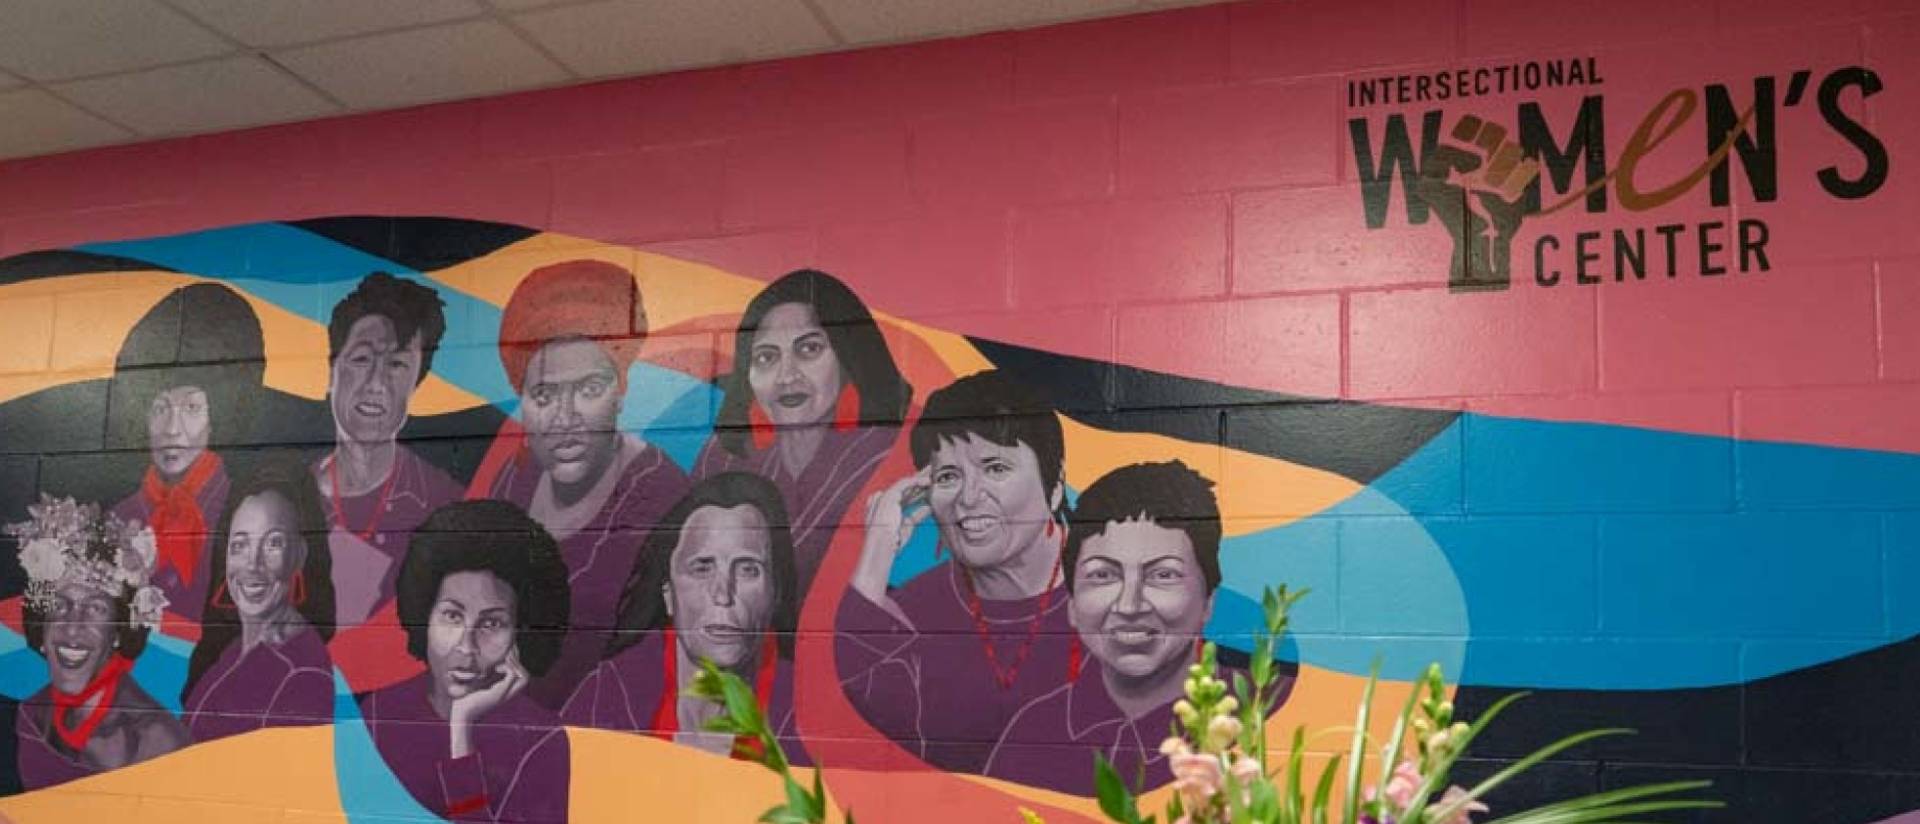 A wall painted with influential women's portraits and the title of Intersectional Women's Center